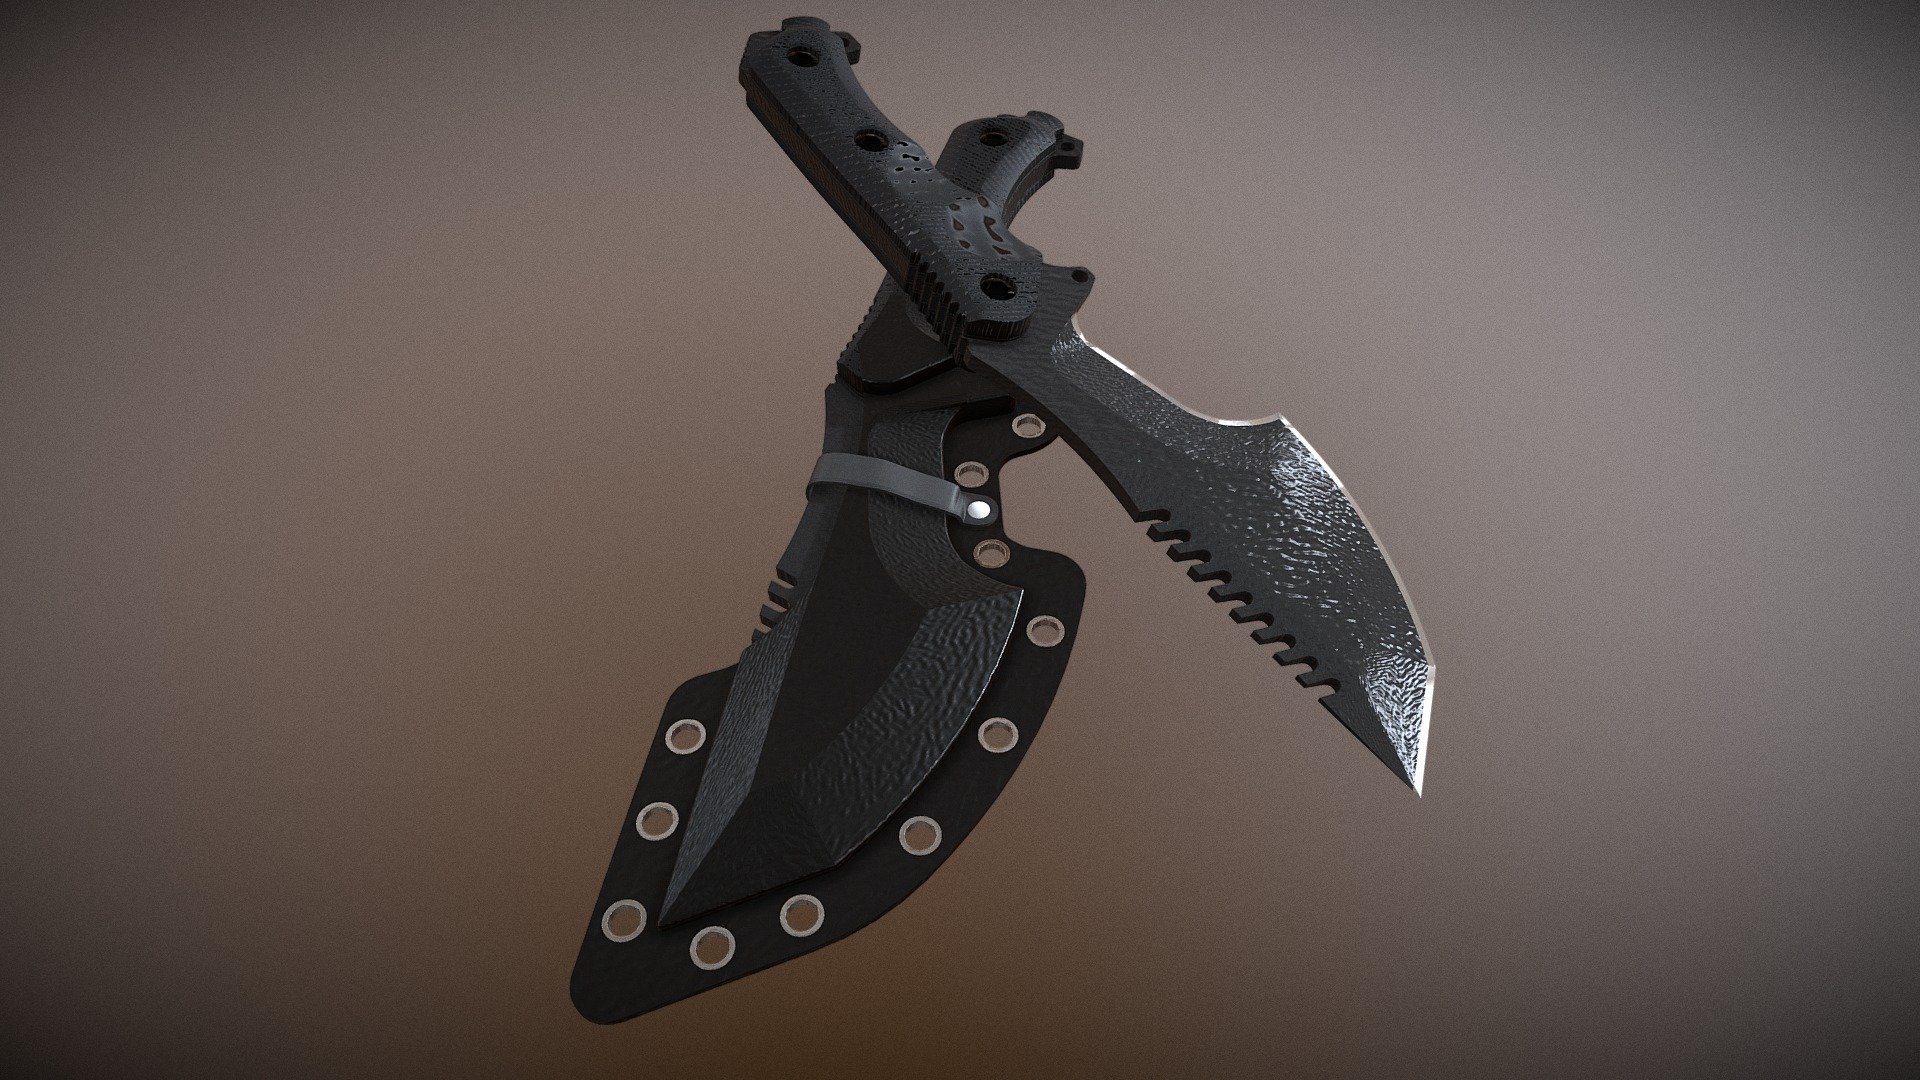 D Tracker is one of popular knife among survivor that combine both of axe and skinner knife in one product.
Brimob Tracker knife designed for Brimob or Indonesian Police Brigade Mobile back in 2016 3d model